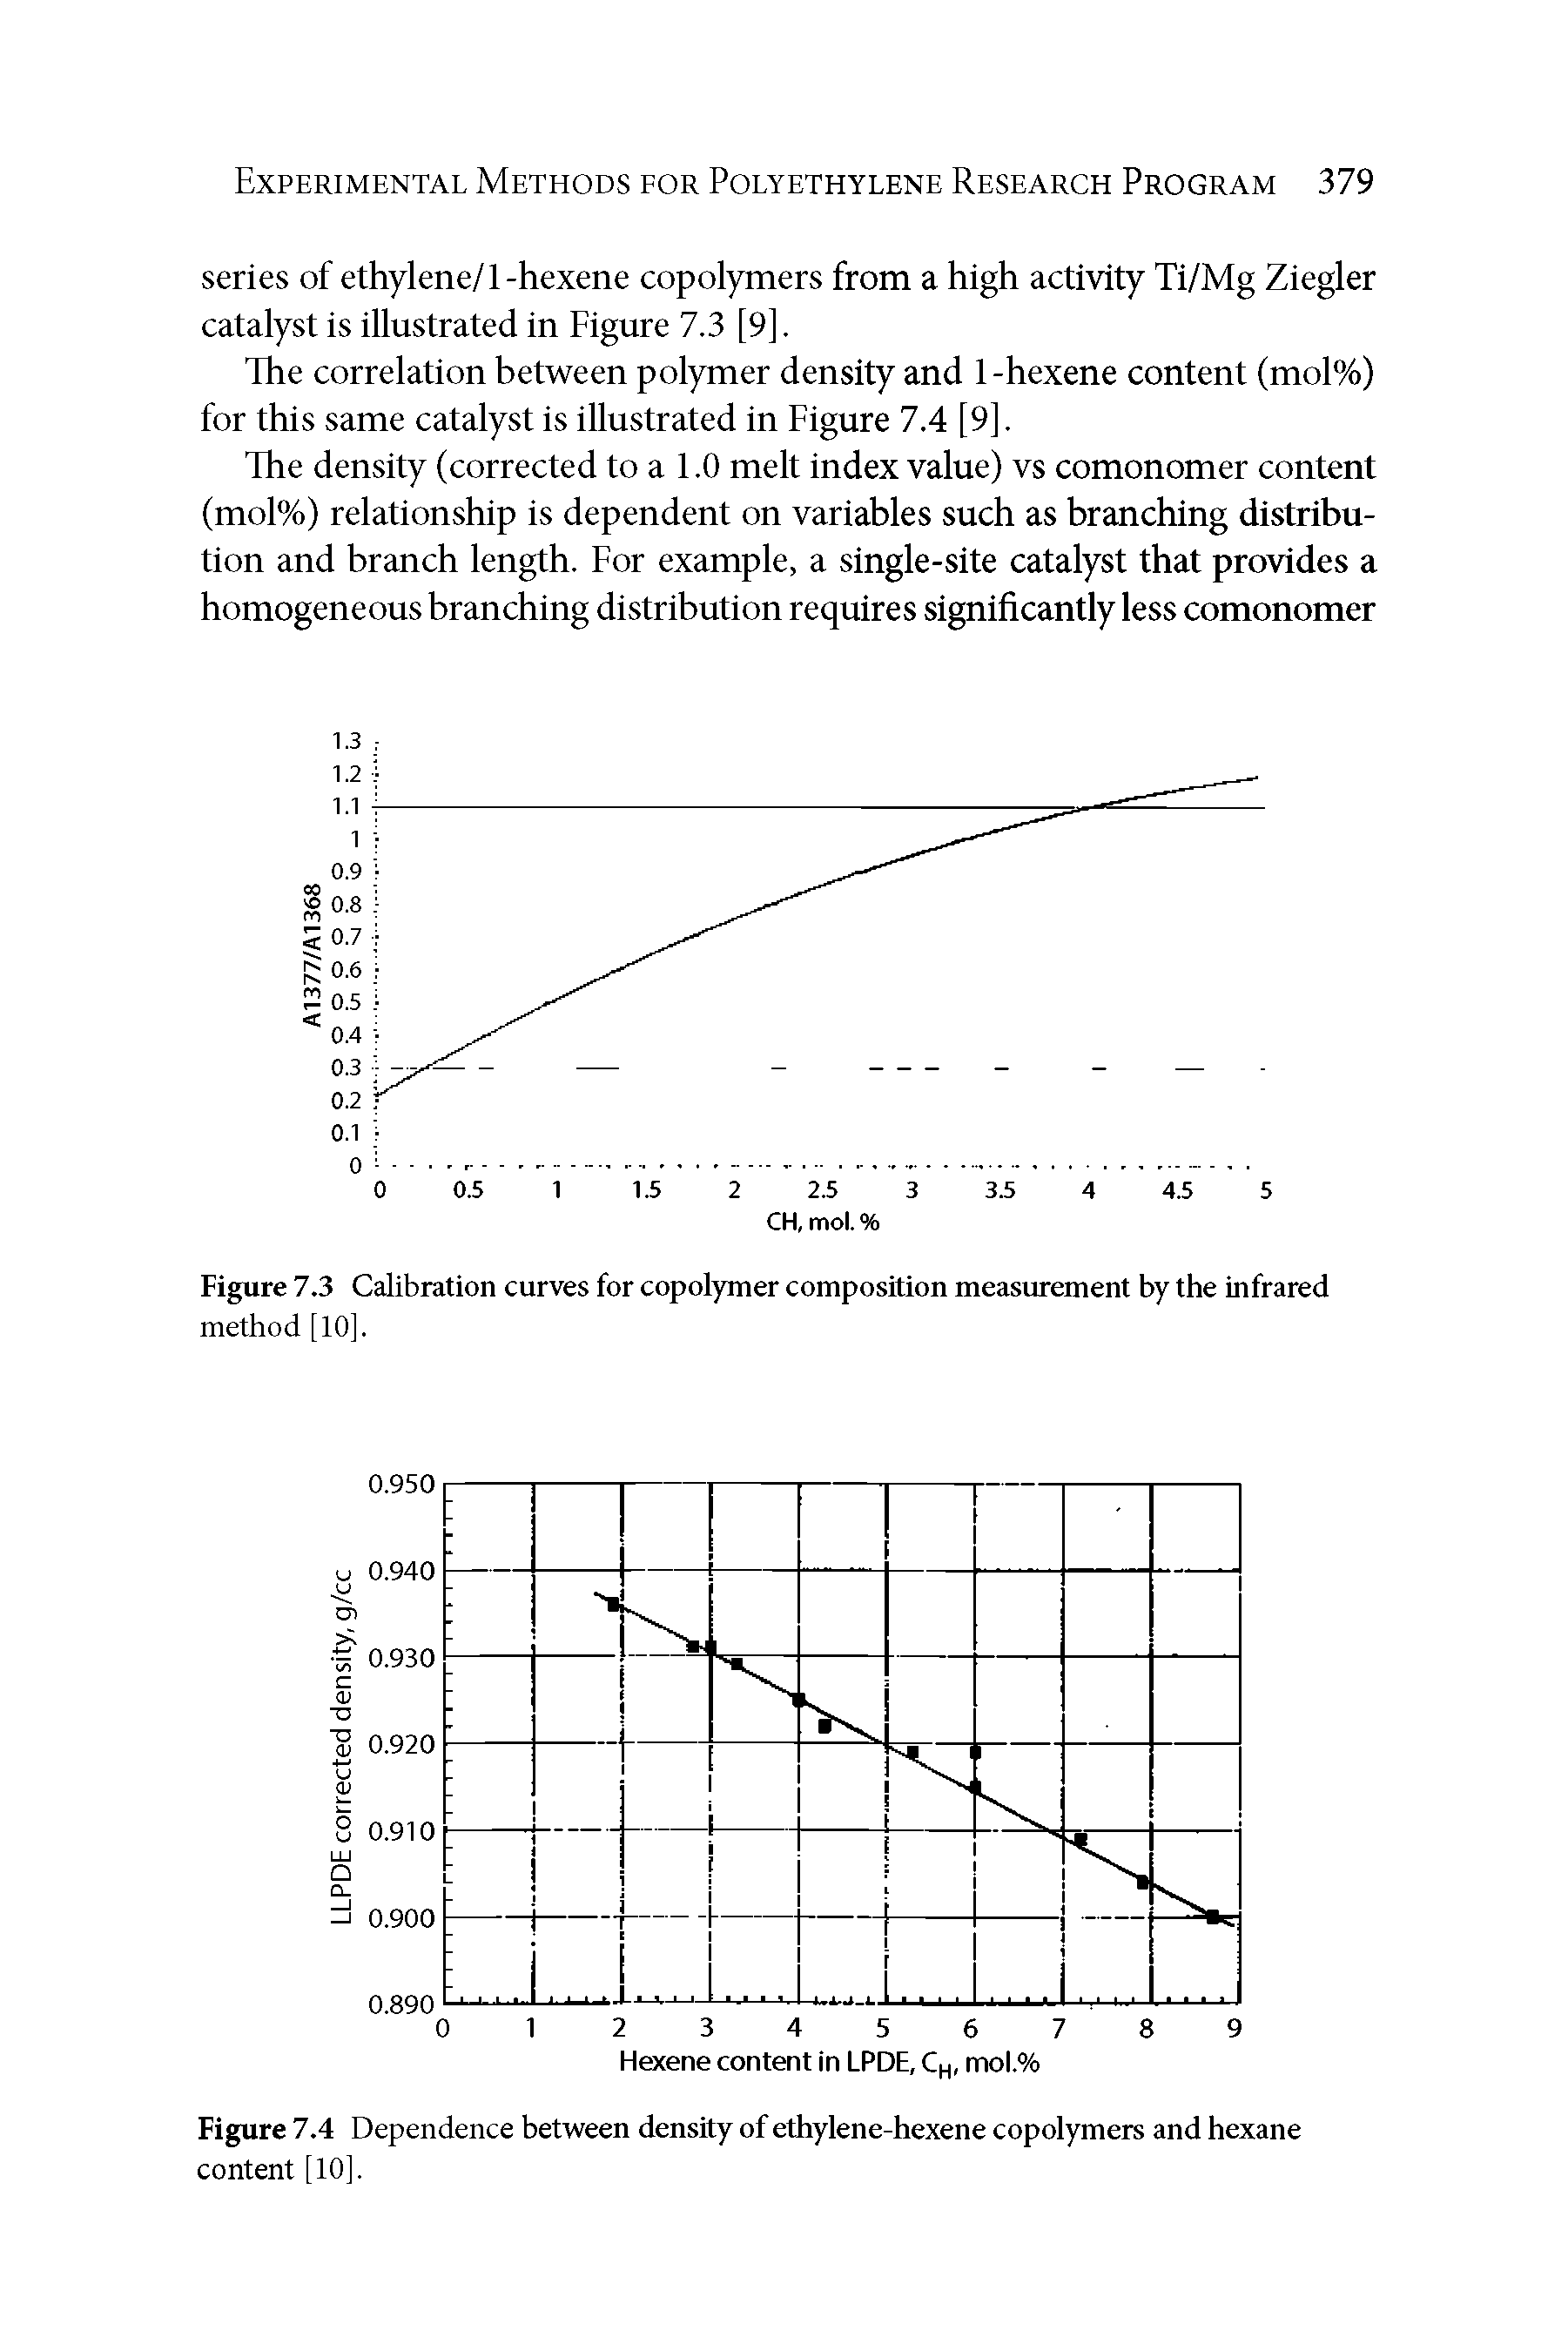 Figure 7.3 Calibration curves for copolymer composition measurement by the infrared method [10].